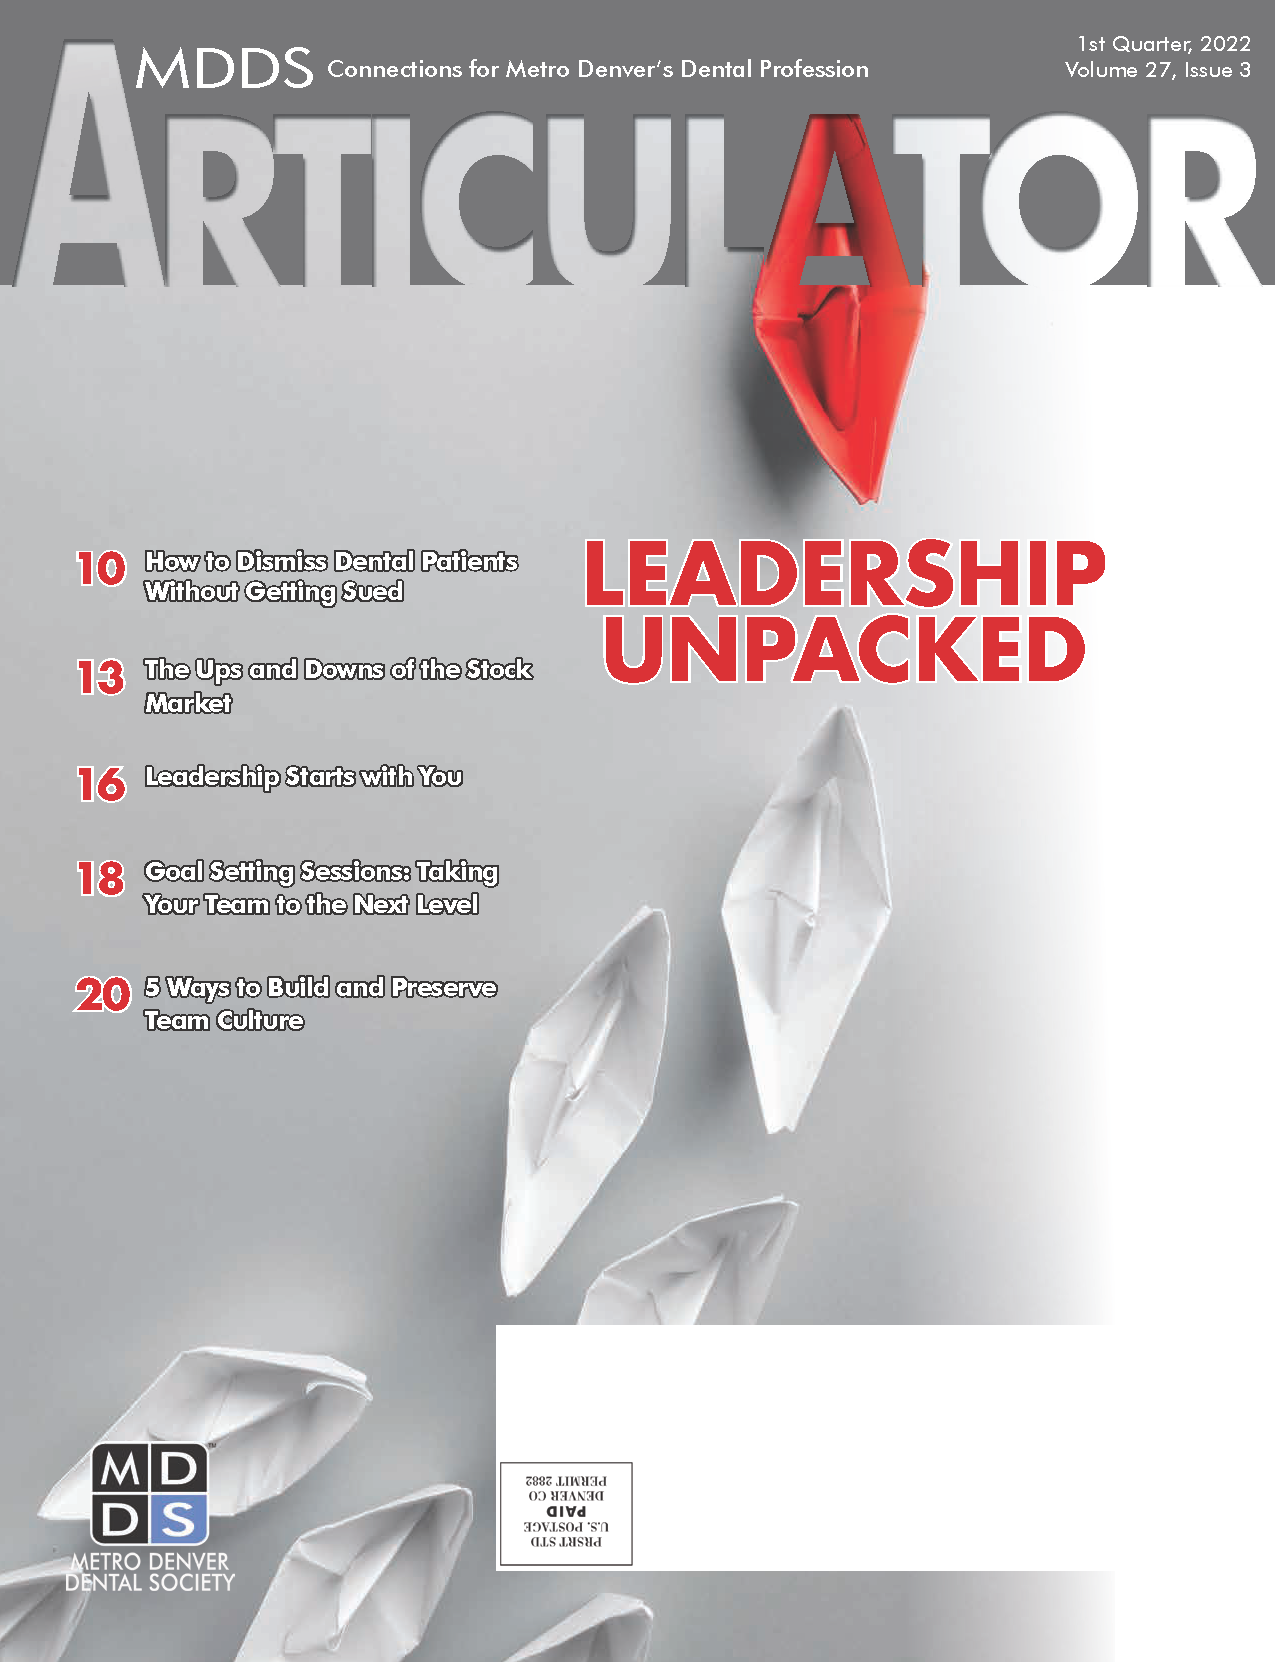 Cover of the Metro Denver Dental Society's Articulator magazine with image of white folded paper boats and a single red boat.